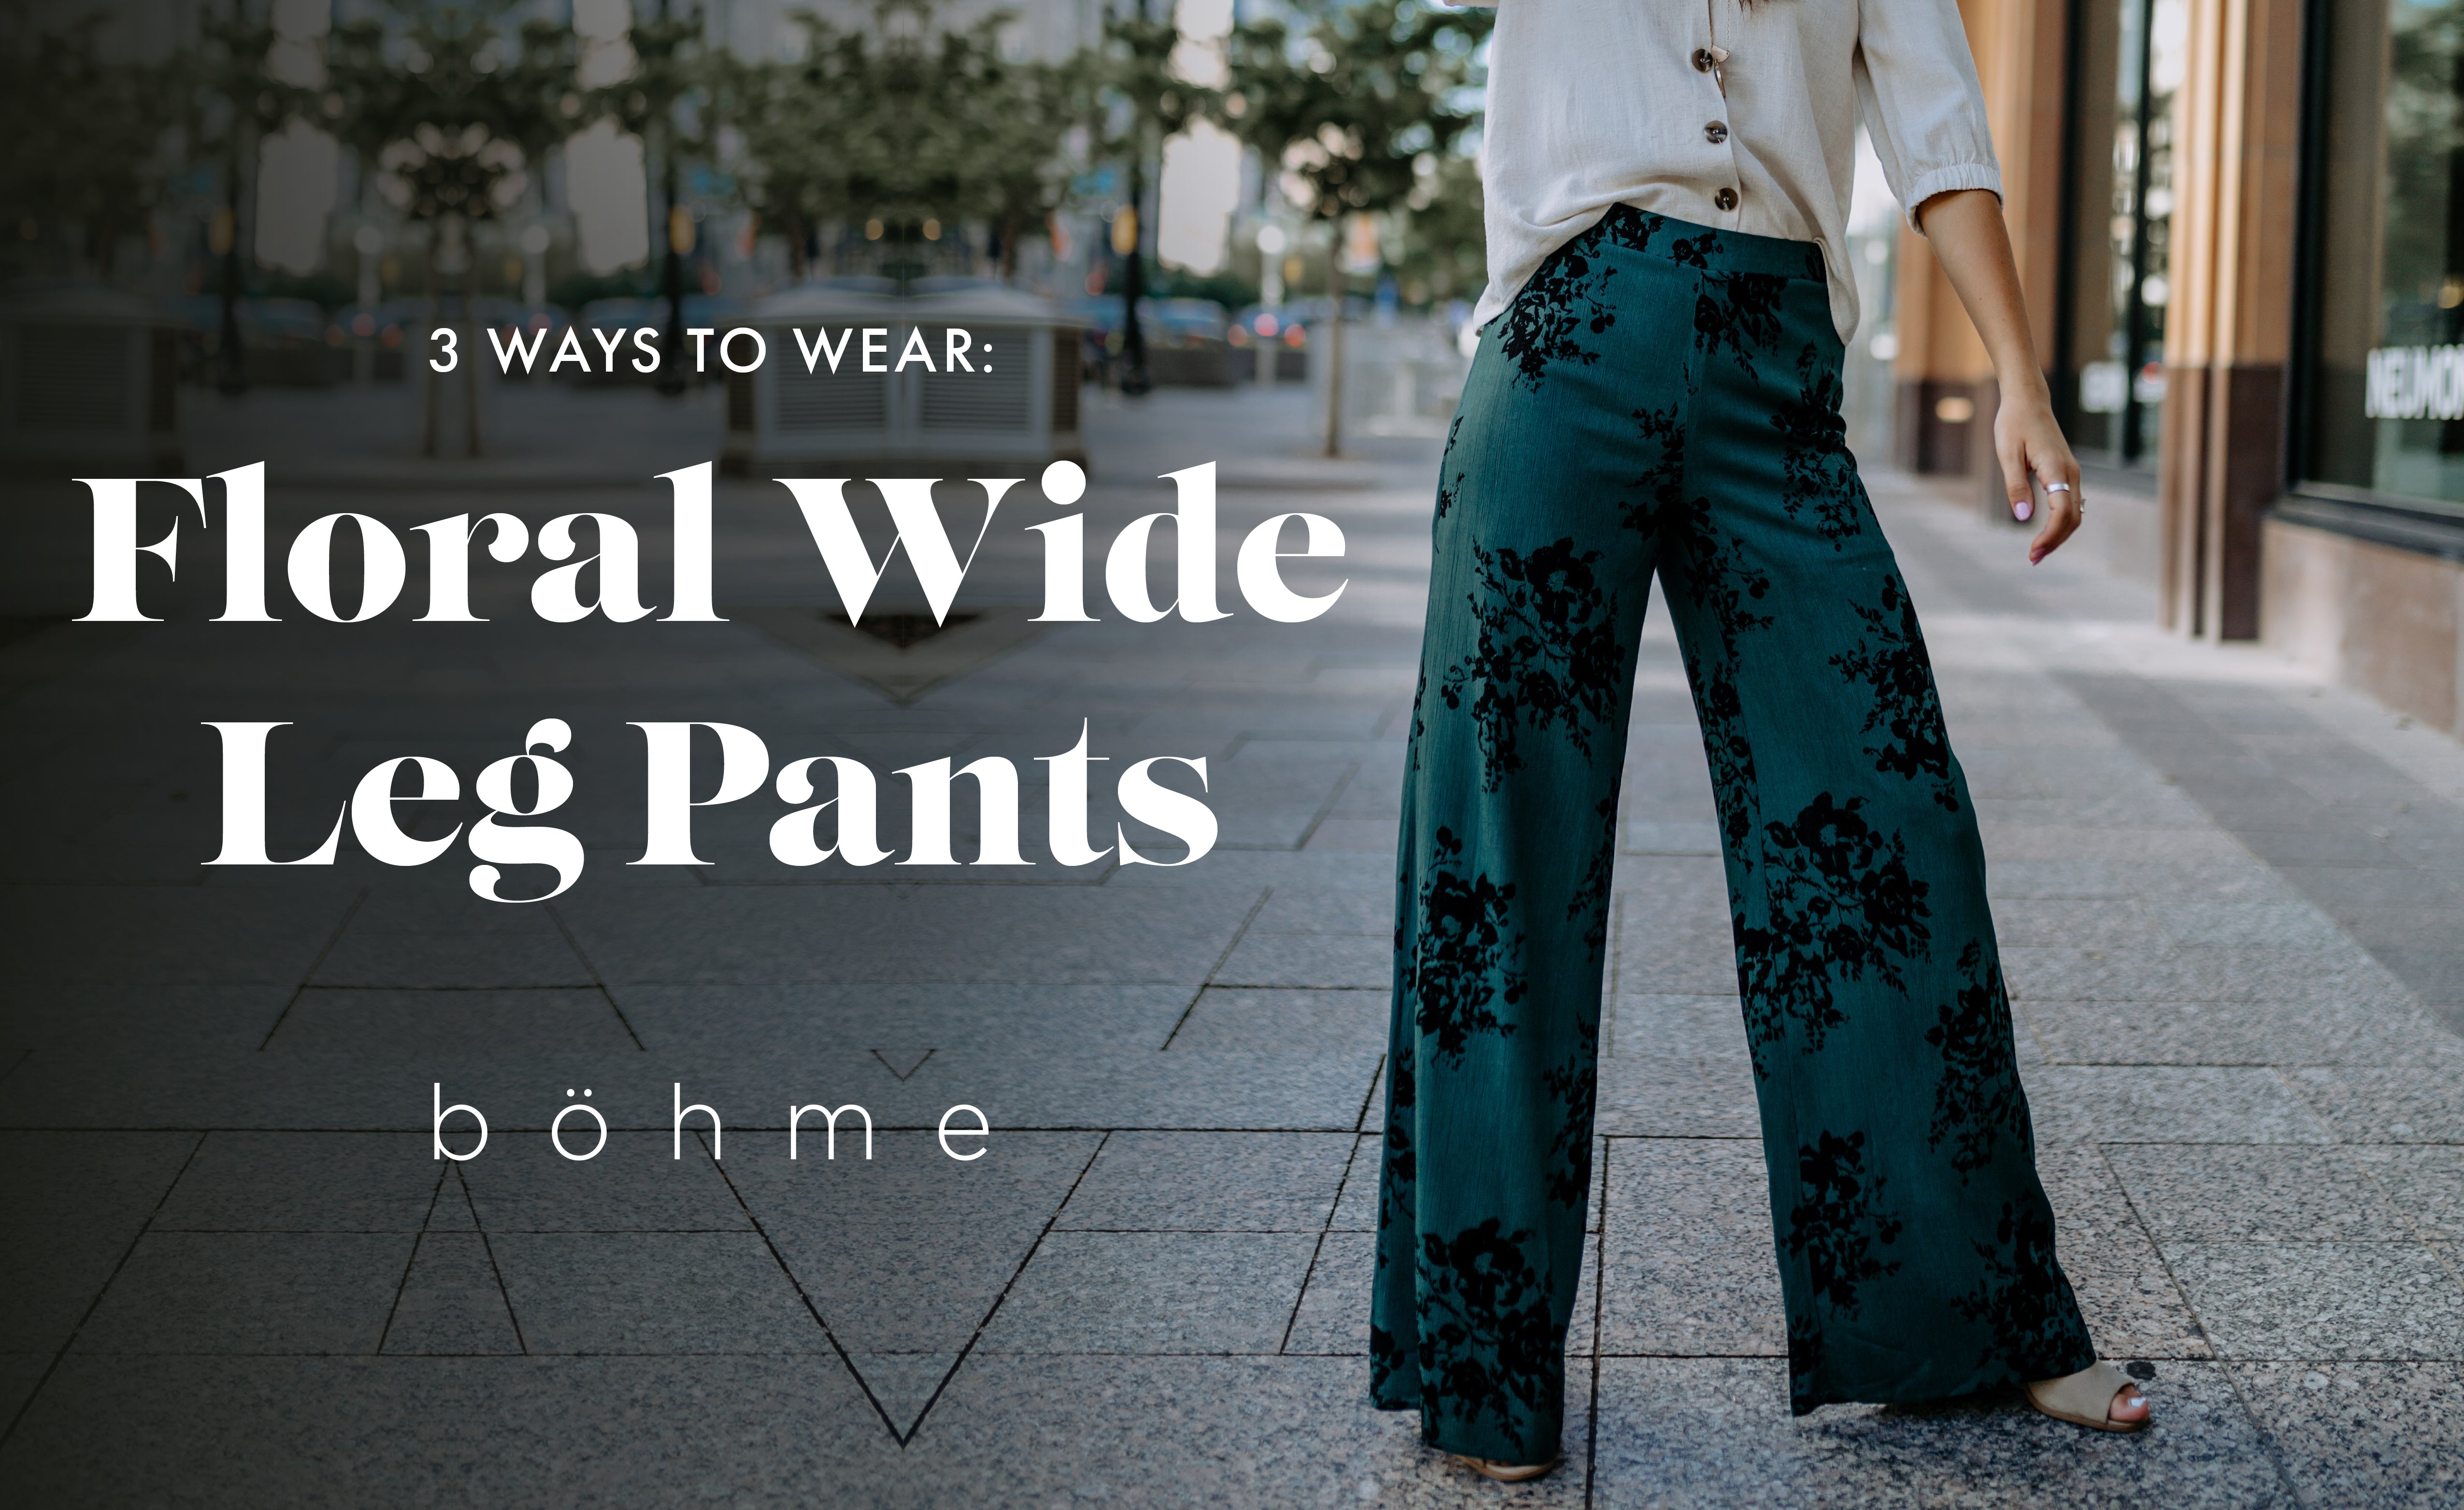 How To Style Floral Pants -- Three Looks And Where To Buy